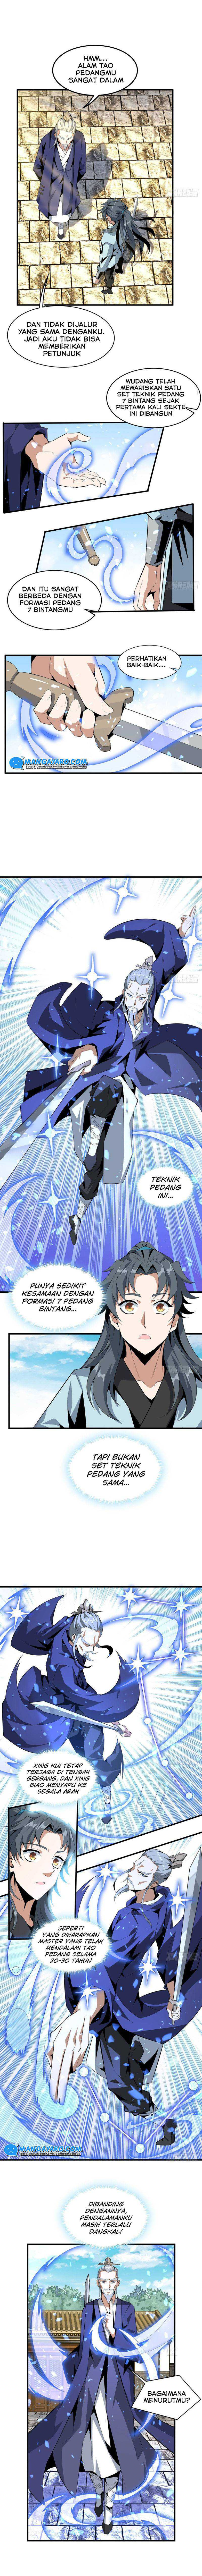 The First Sword of Earth Chapter 37